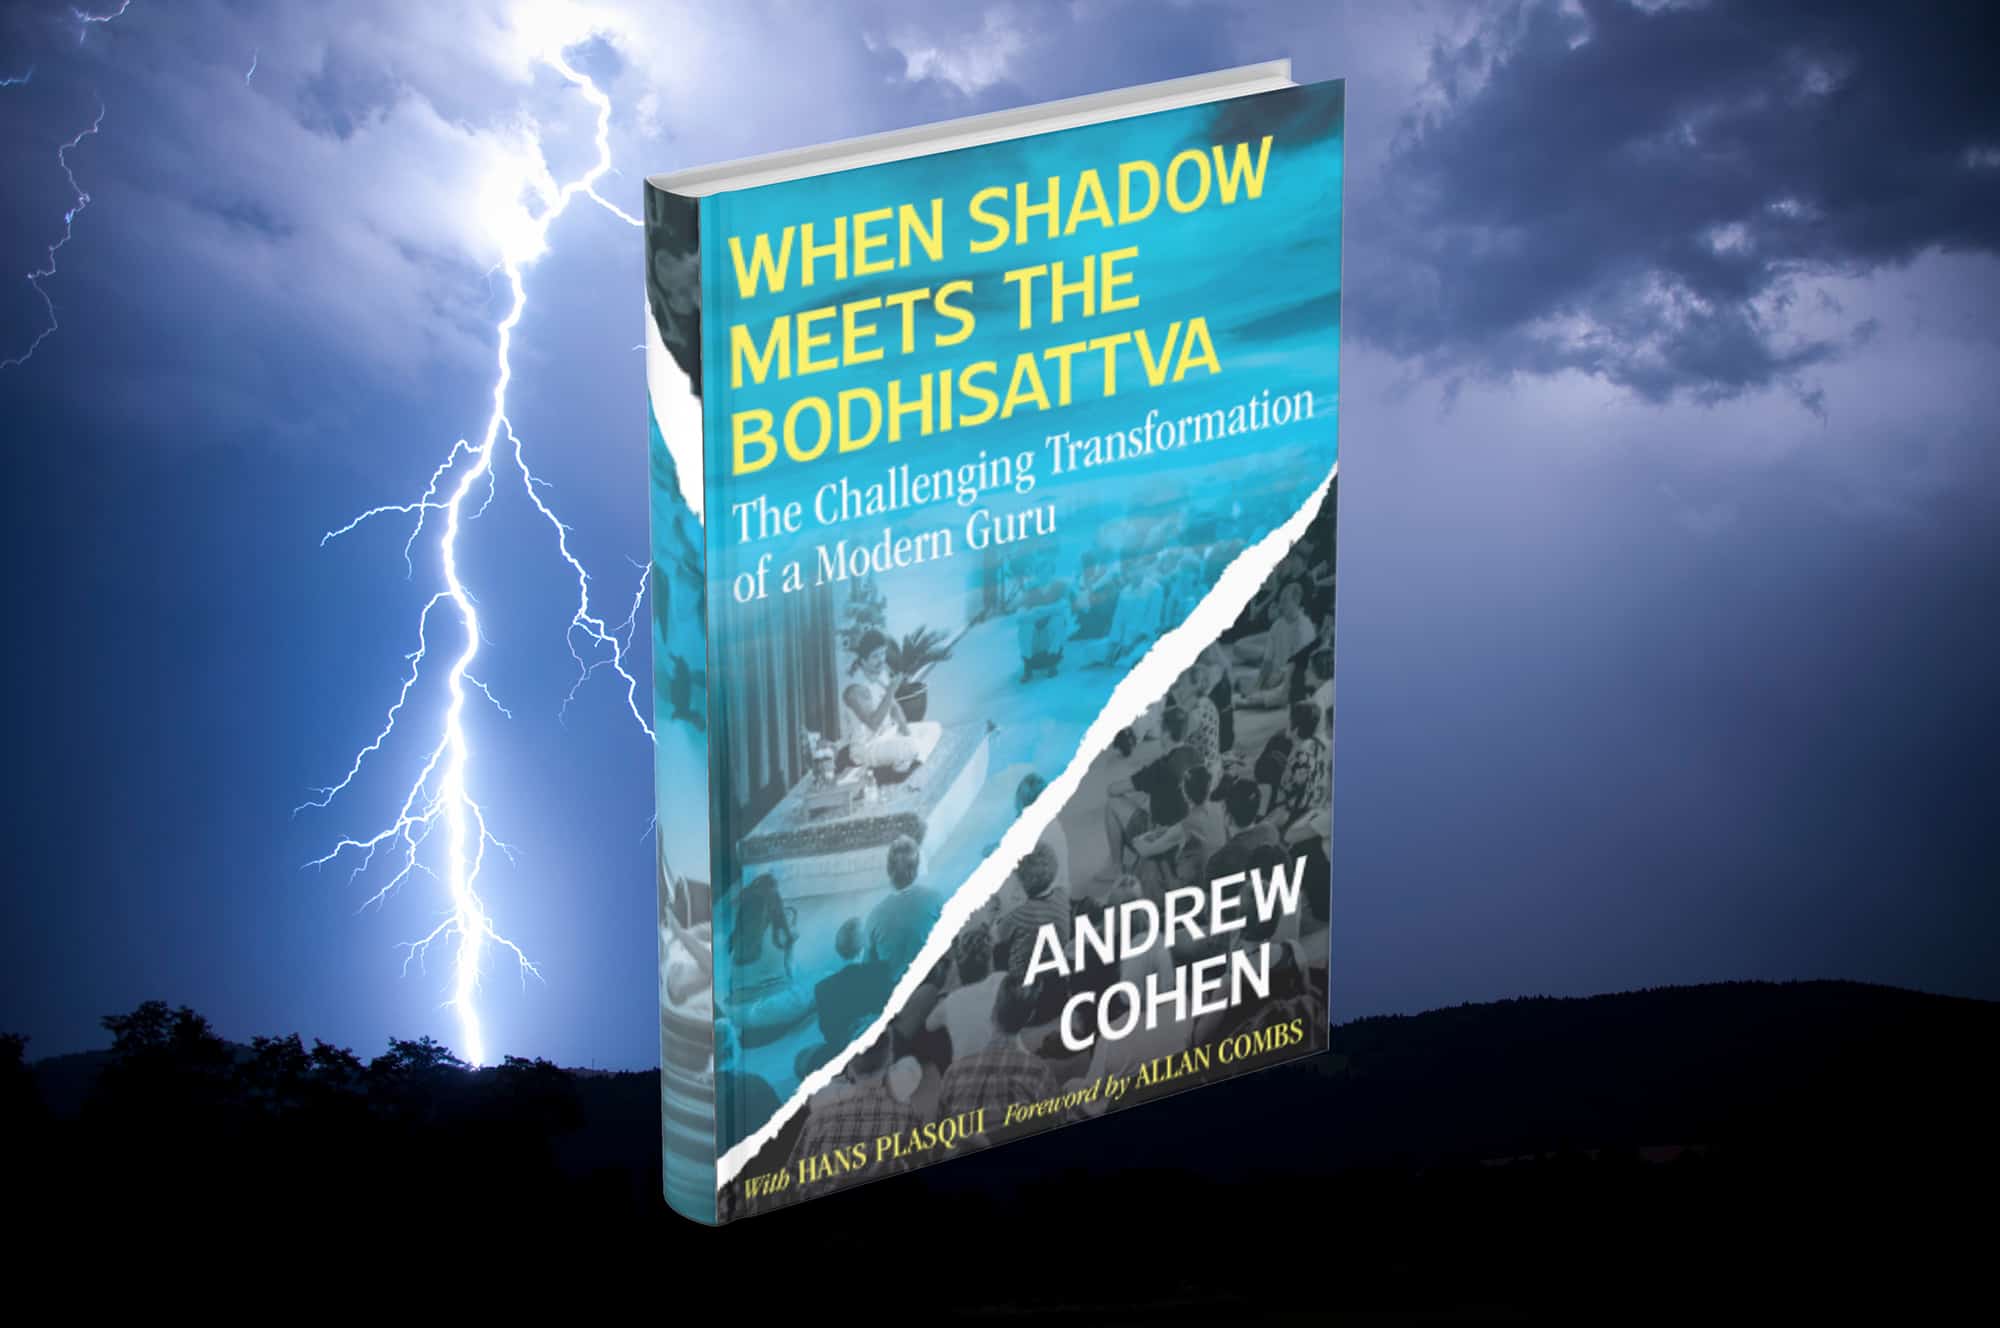 Featured image for “When Shadow Meets the Bodhisattva”